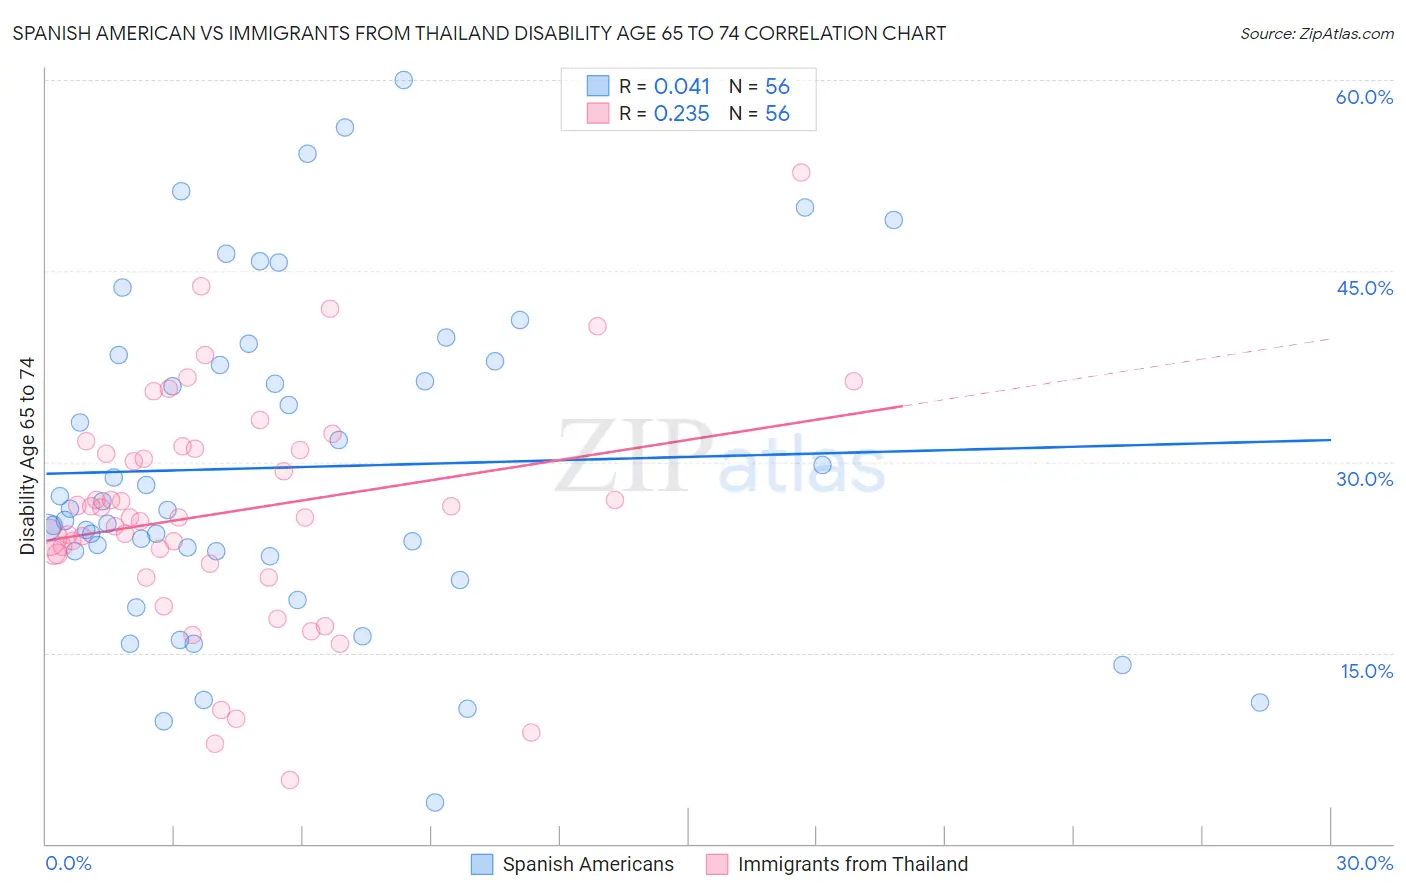 Spanish American vs Immigrants from Thailand Disability Age 65 to 74